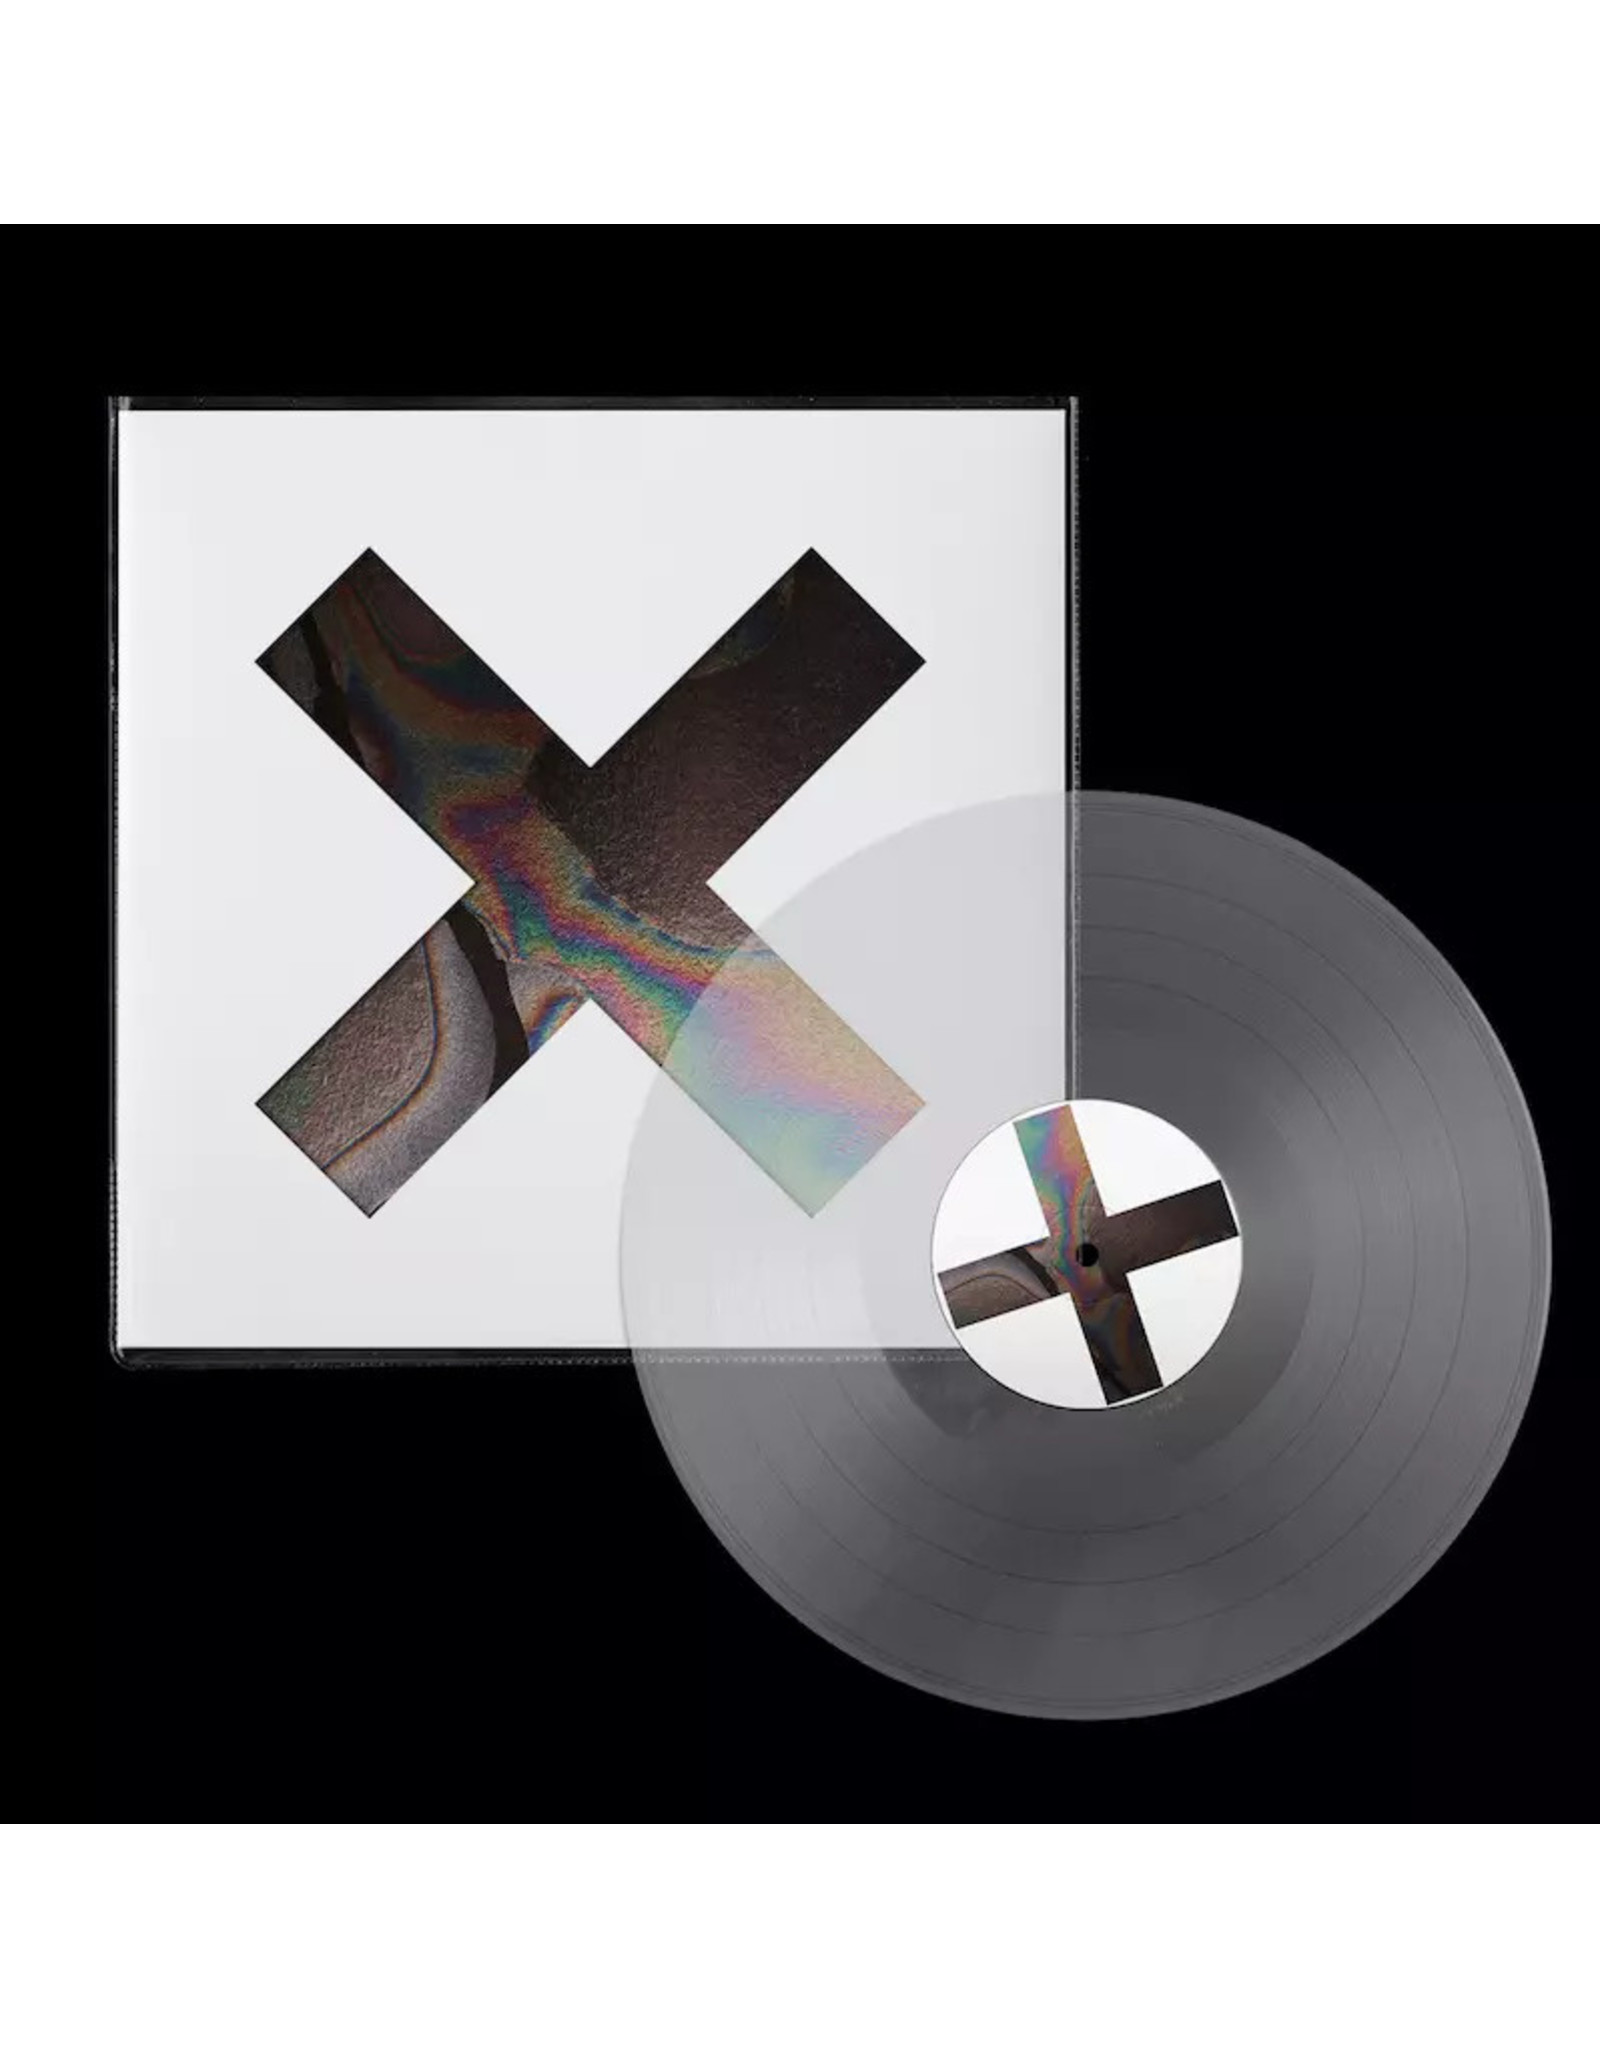 The XX - Coexist (10th Anniversary) [Exclusive Clear Vinyl]